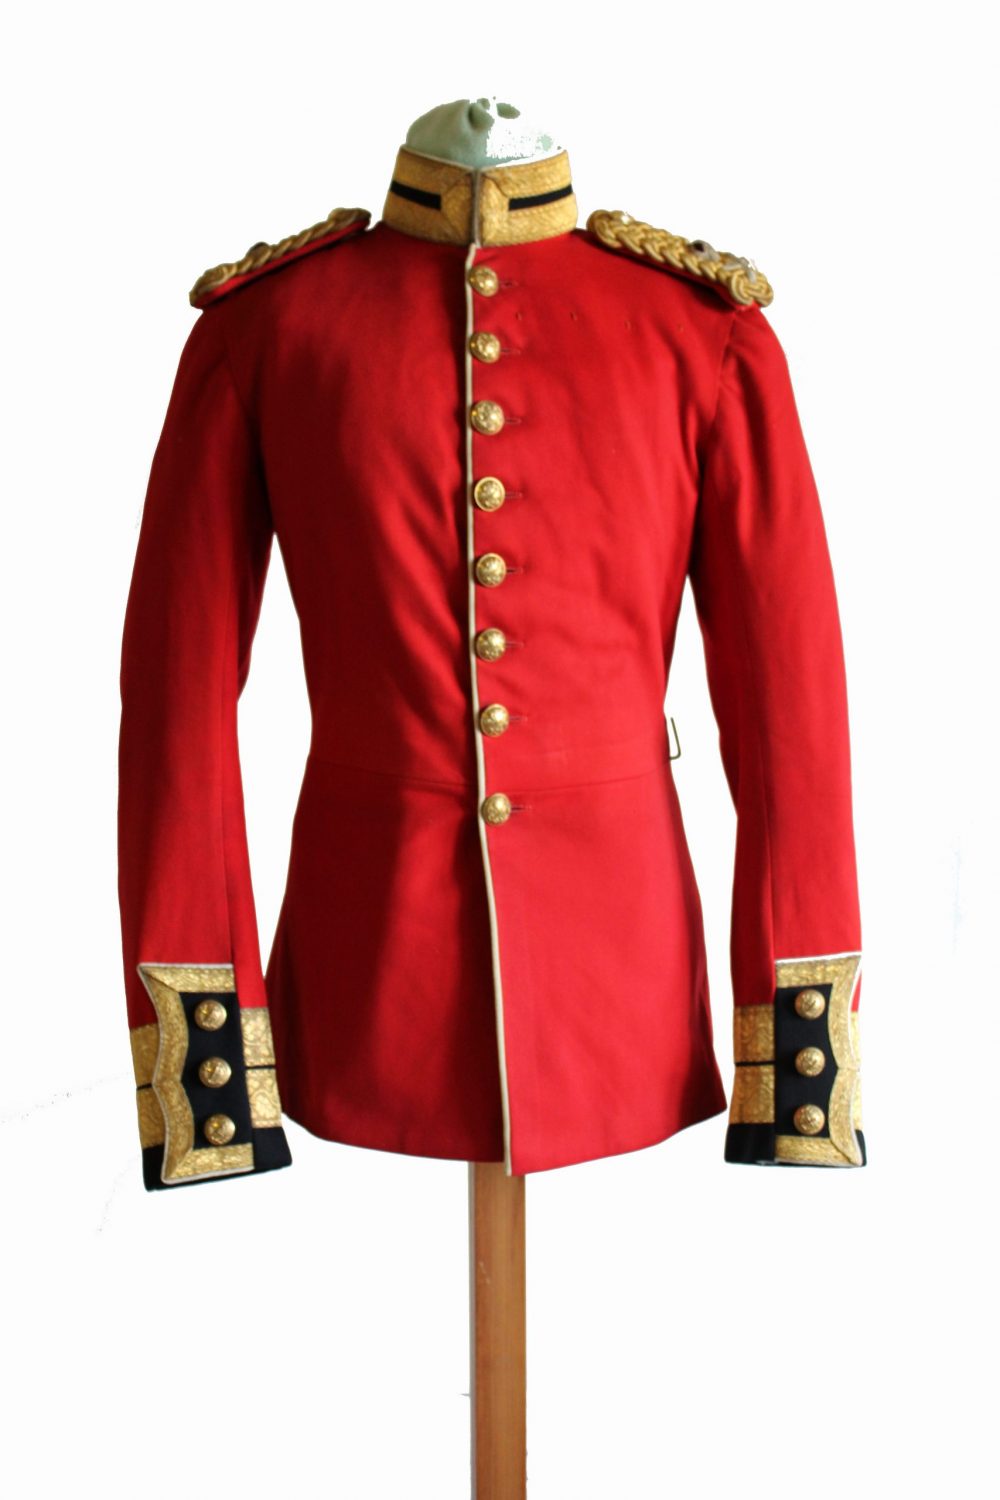 Red military jacket with gold buttons, collar, sleeve cuffs and shoulder epaulettes